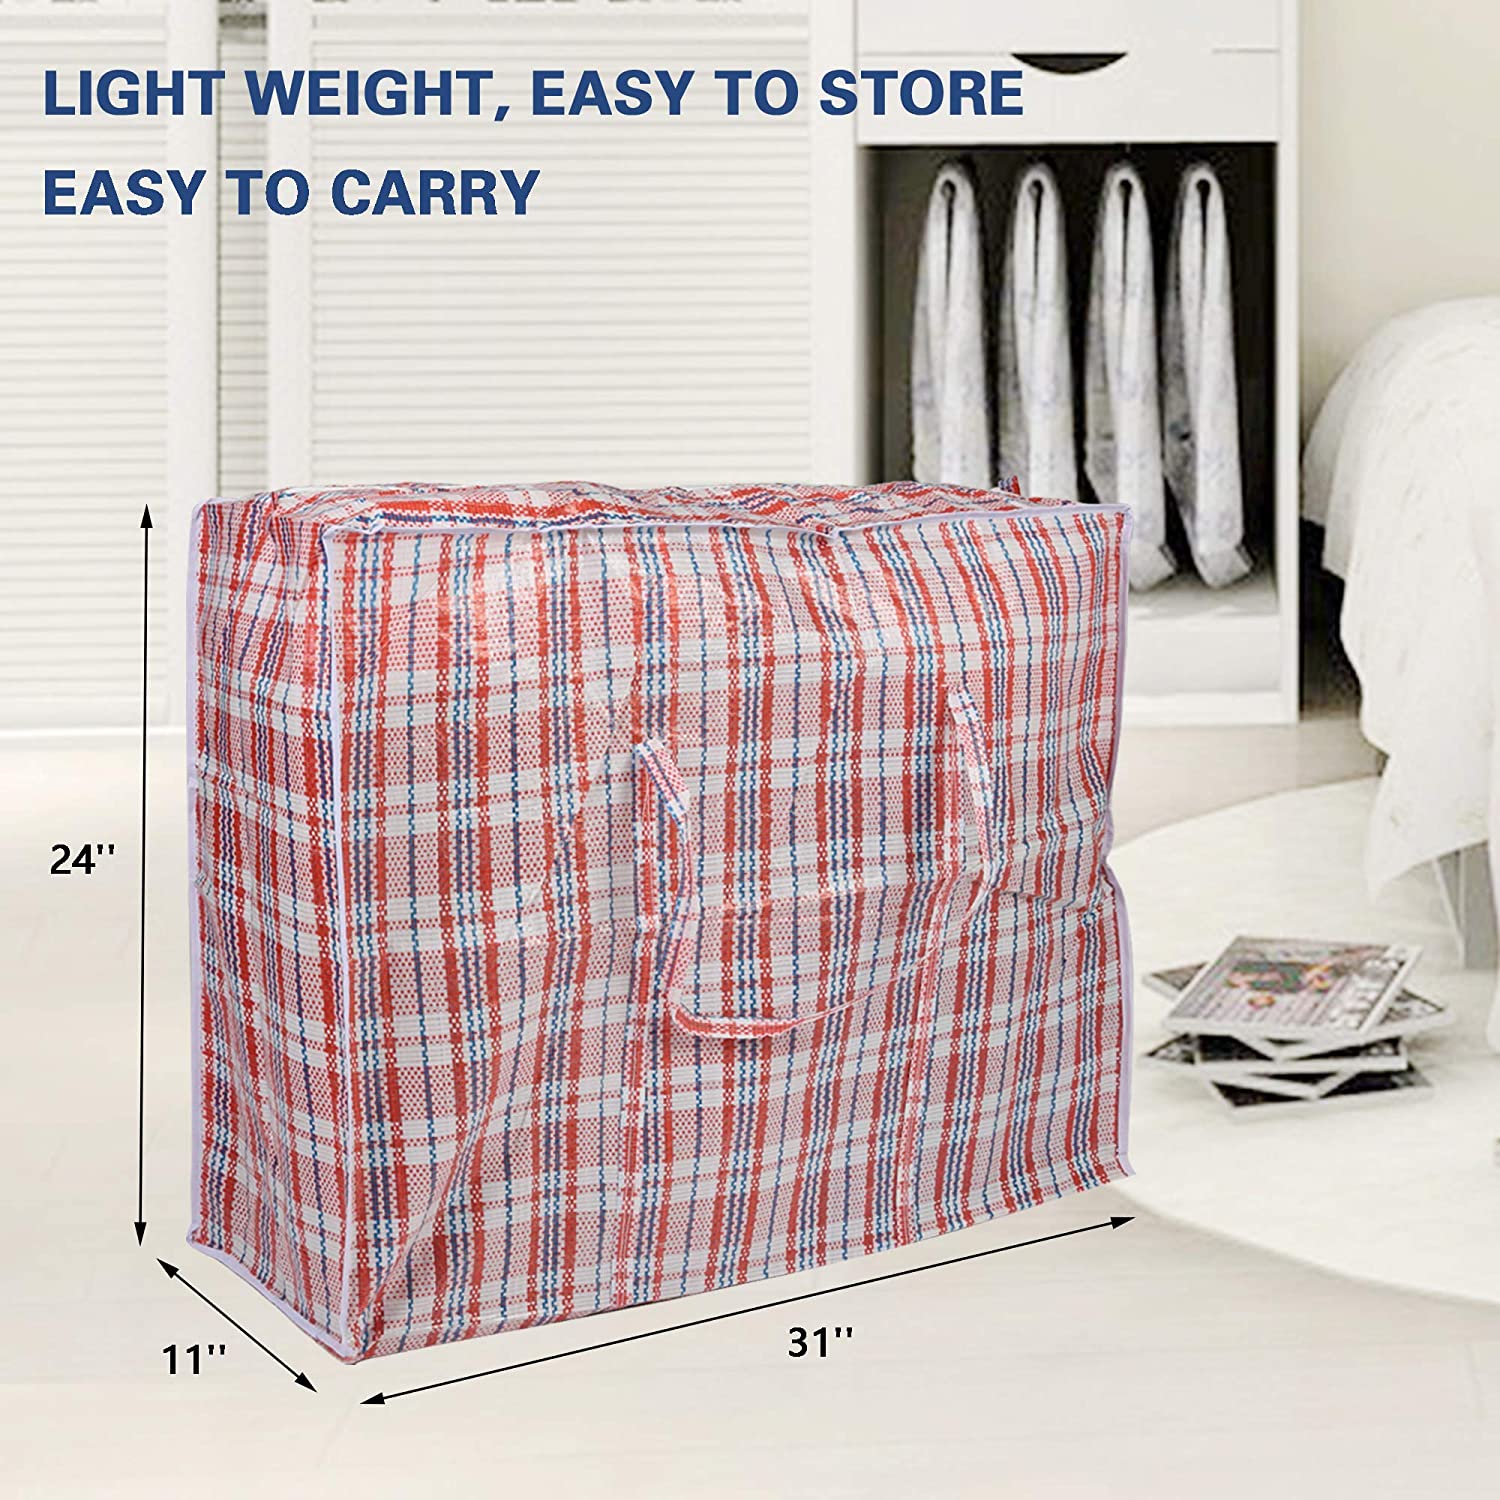 3PC Plastic Woven Storage Bag Moving Tote Clothes Laundry Travel Organizer w/ Zipper & Handles